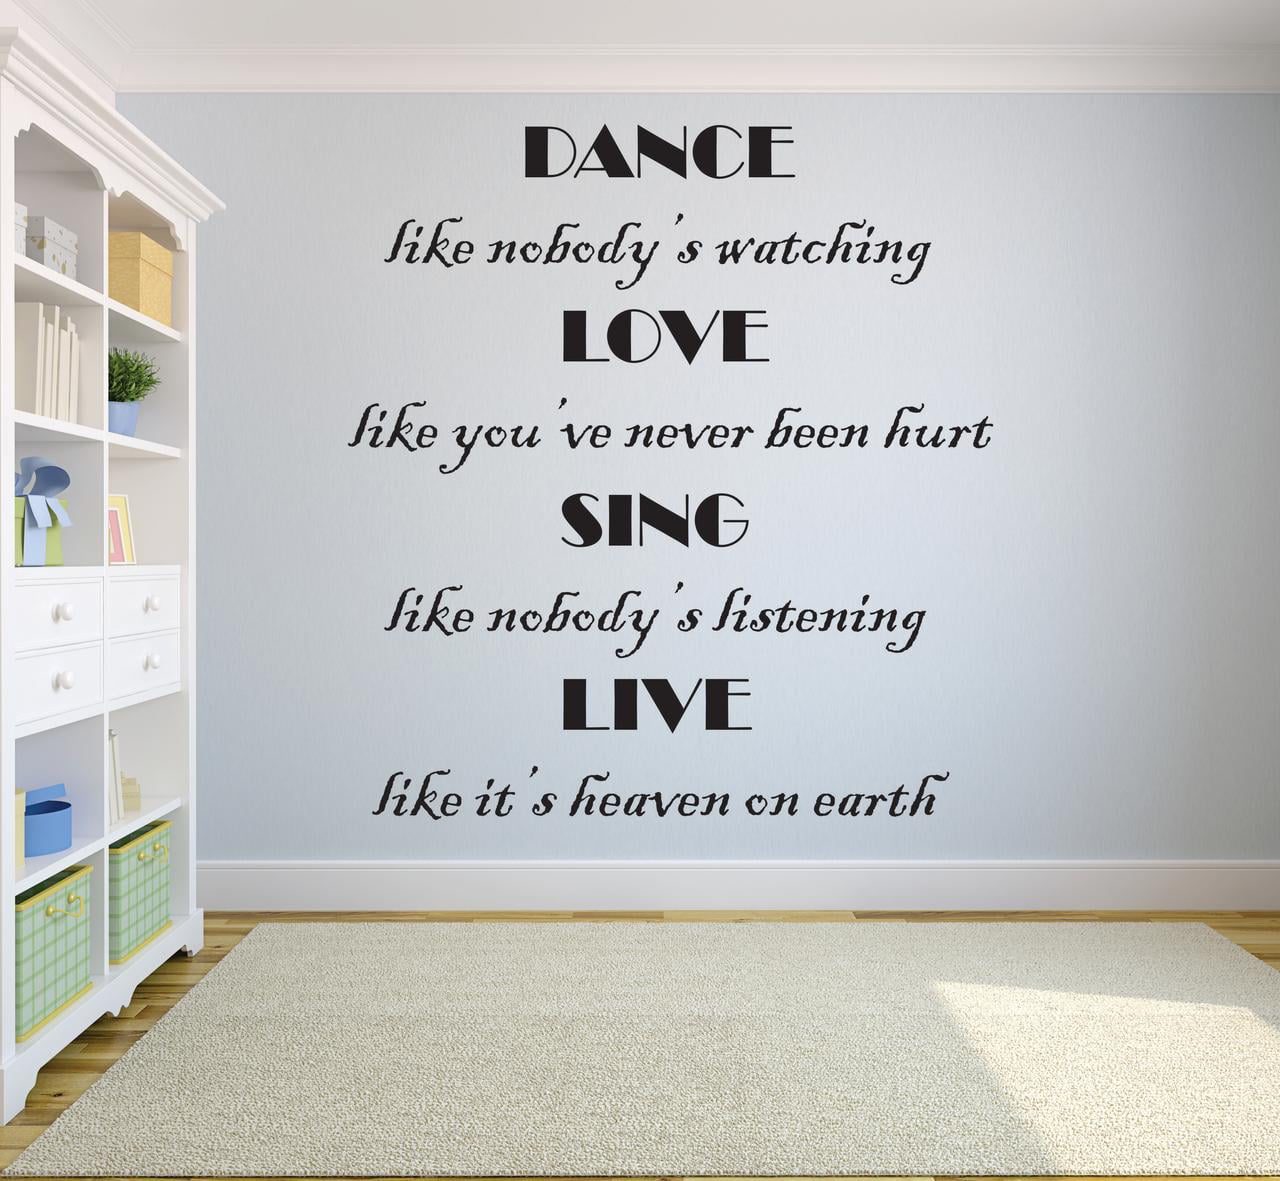 QUOTE DANCE LIKE NO-ONE WATCHING LOVE SING 18X24 '' POSTER ART PRINT LF004 